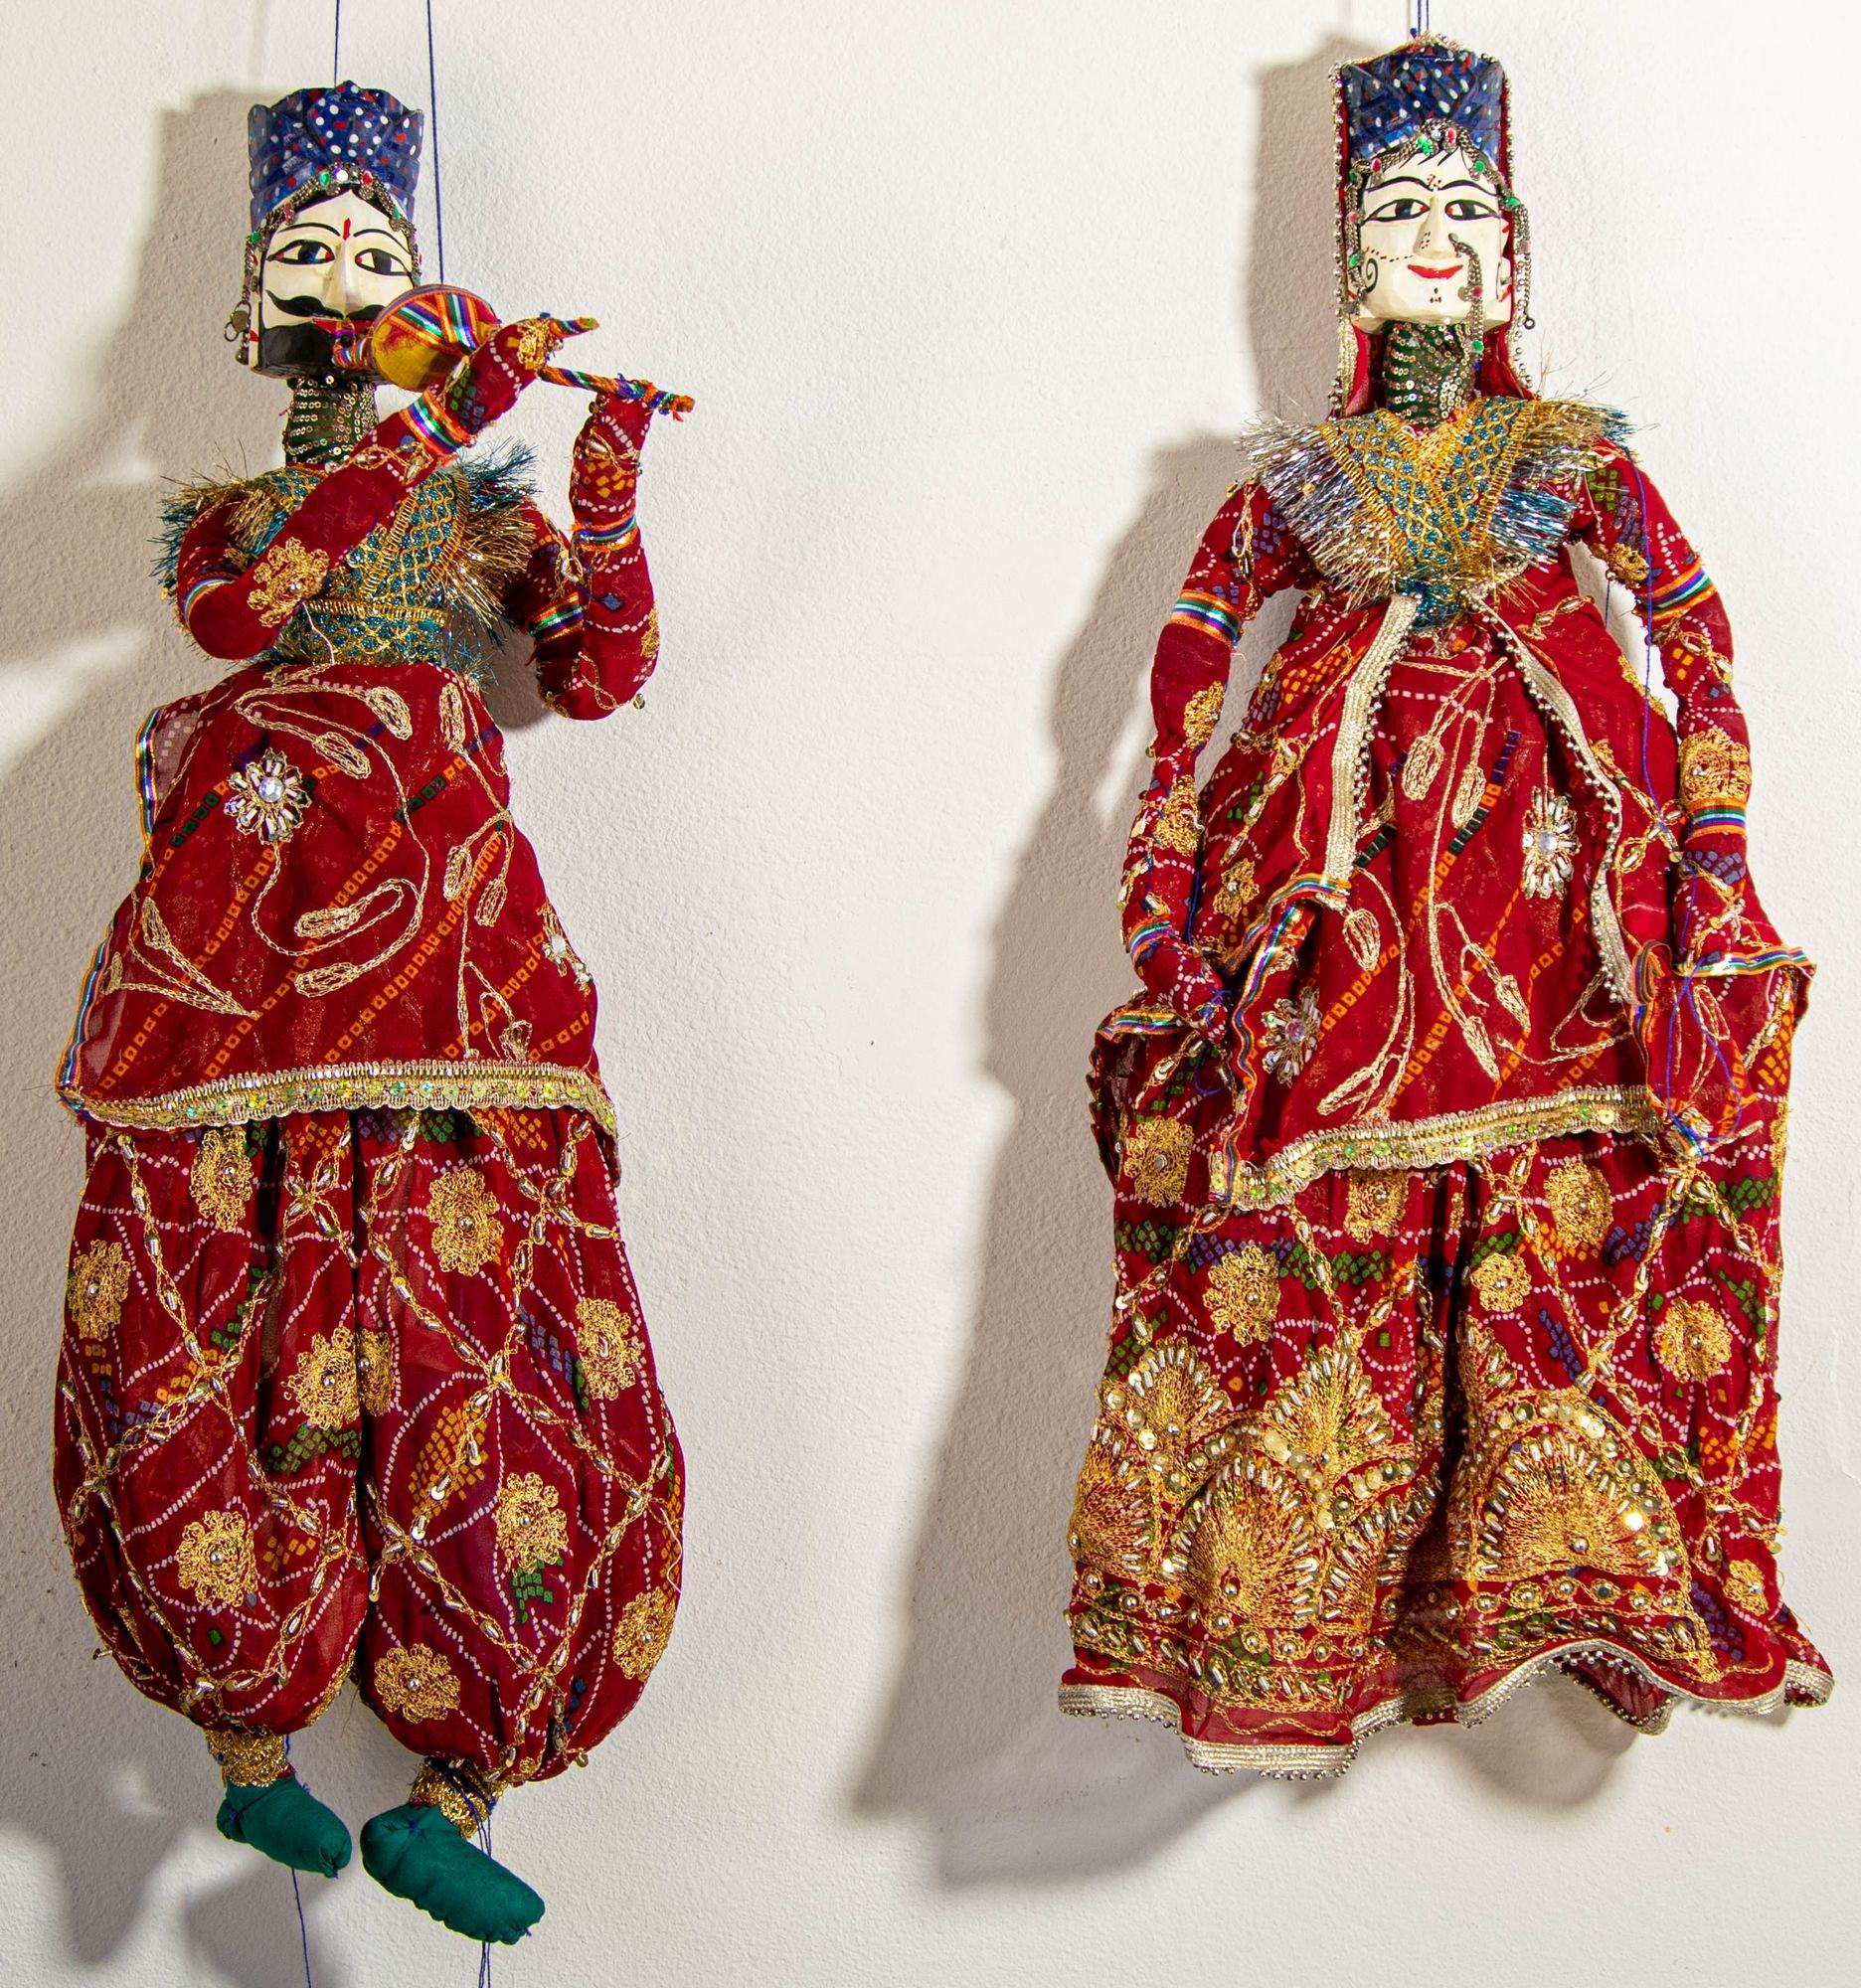 Large pair of vintage 1950s string marionettes, these magnificent Rajasthani Kathputli puppets came from the vibrant state of Rajasthan in northwestern India.
Meticulously handcrafted from wood and recycled silk sari fabric adorned in resplendent